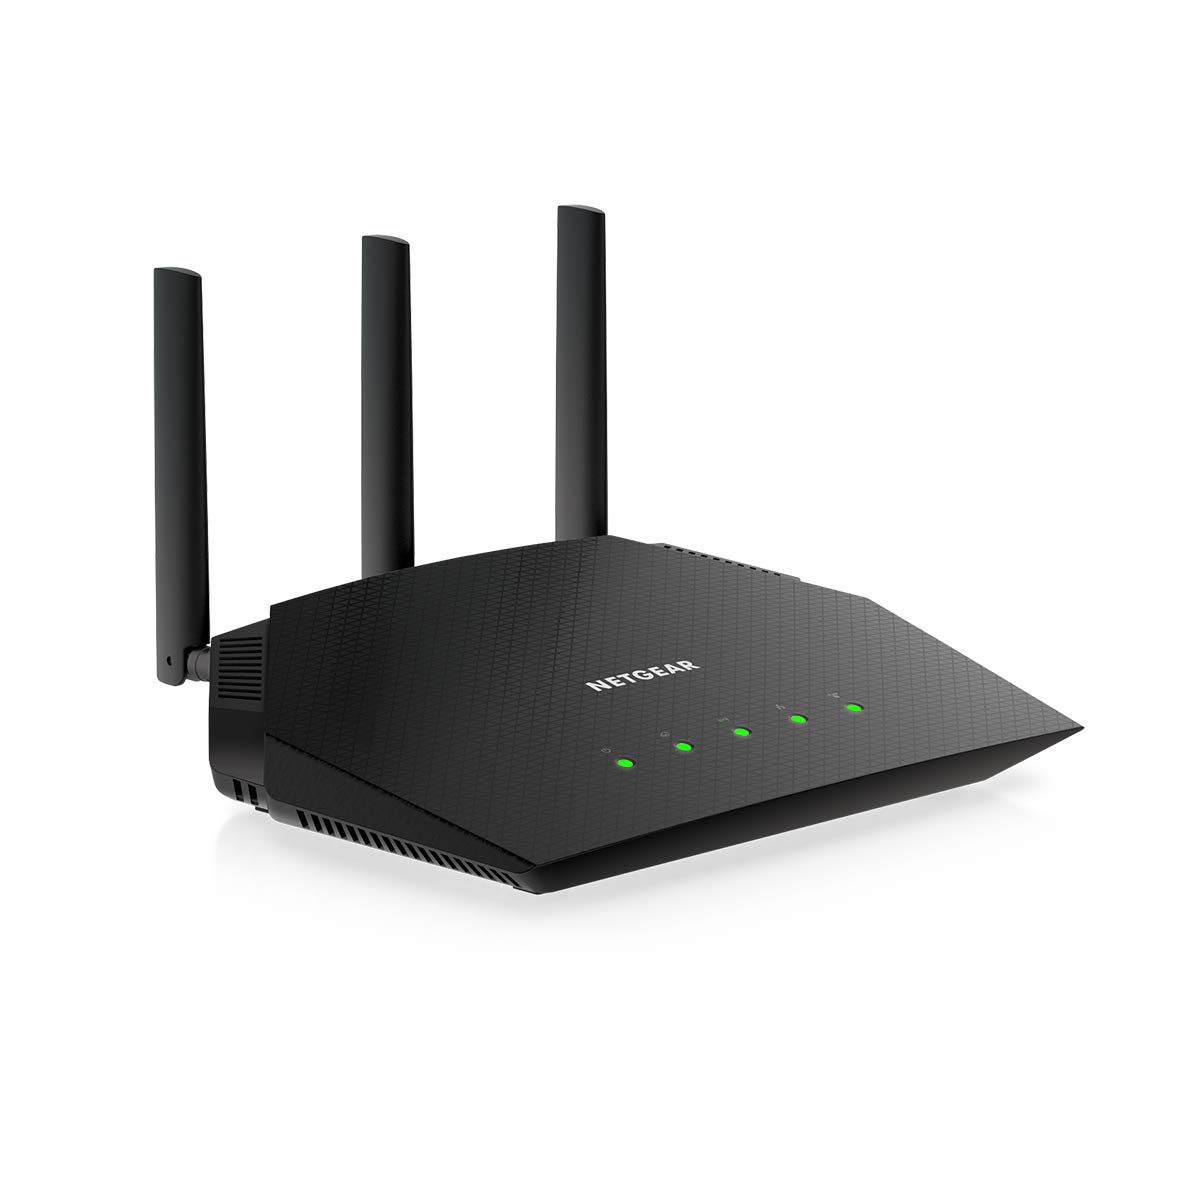 NETgEAR 4-Stream WiFi 6 Router (R6700AX) - AX1800 Wireless Speed (Up to 18 gbps)  coverage up to 1,500 sq ft, 20 devices